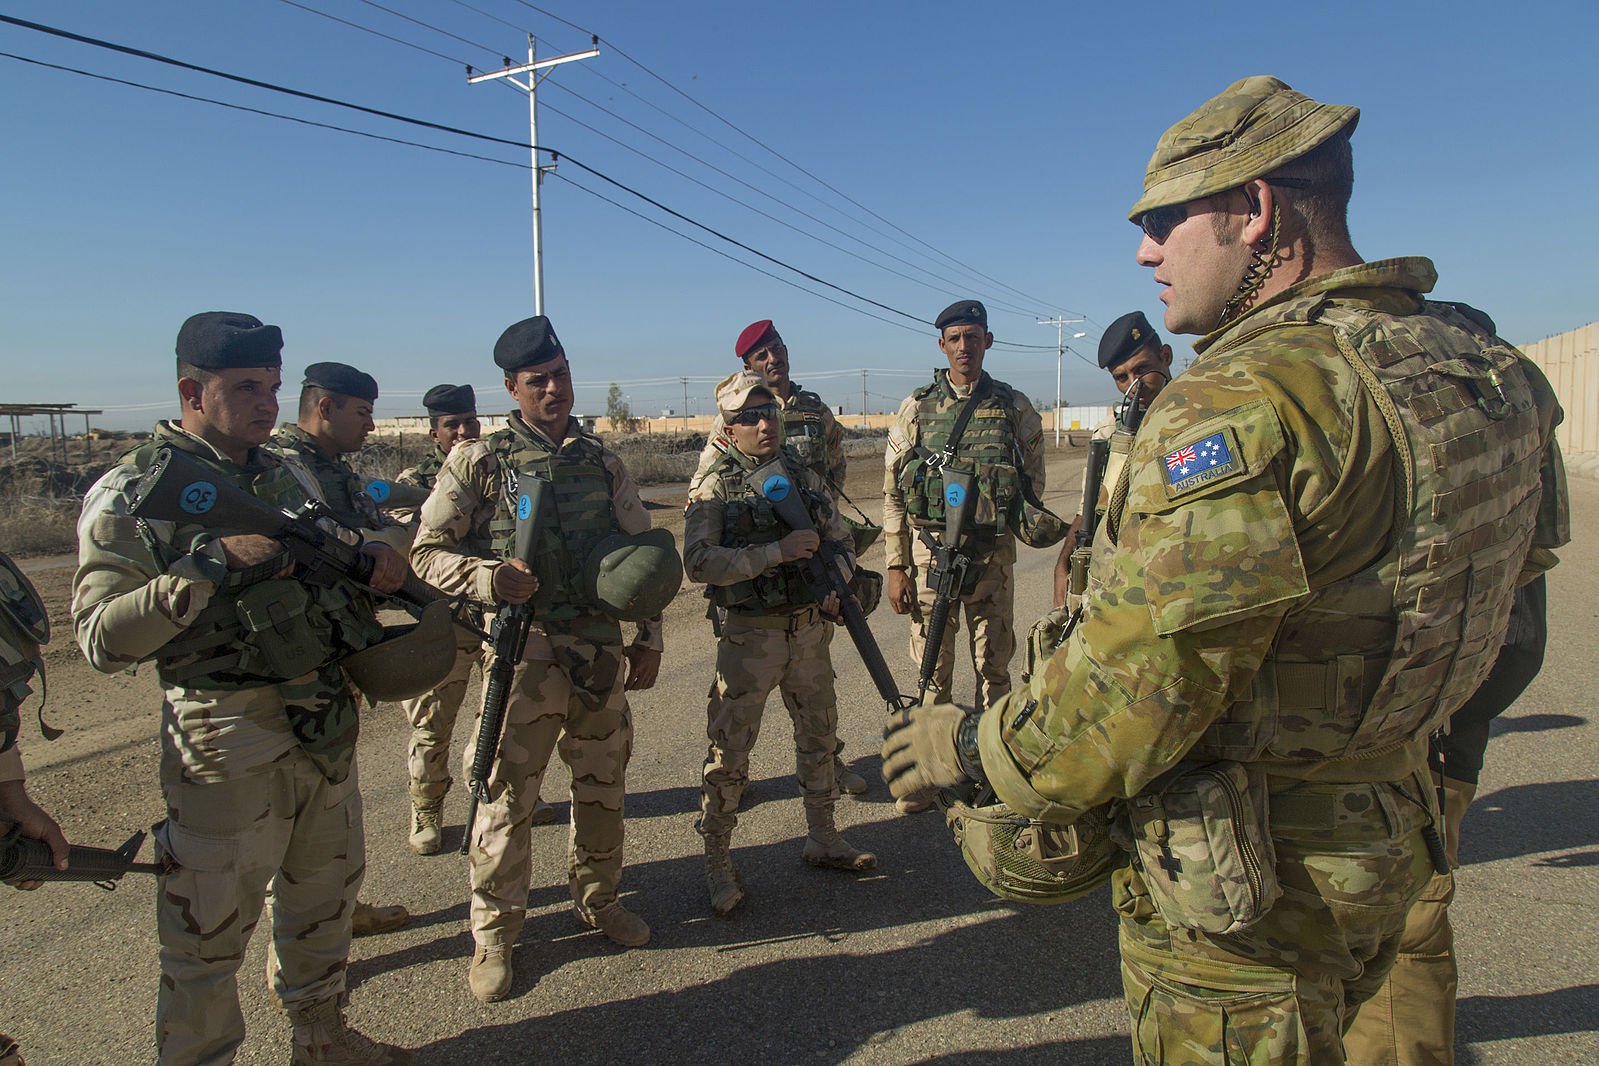 An_Australian_soldier_assigned_to_Task_Group_Taji_conducts_an_after_action_review_with_Iraqi_soldiers_assigned_to_71st_Iraqi_Army_Brigade_at_Camp_Taji_in_November_2015.jpeg